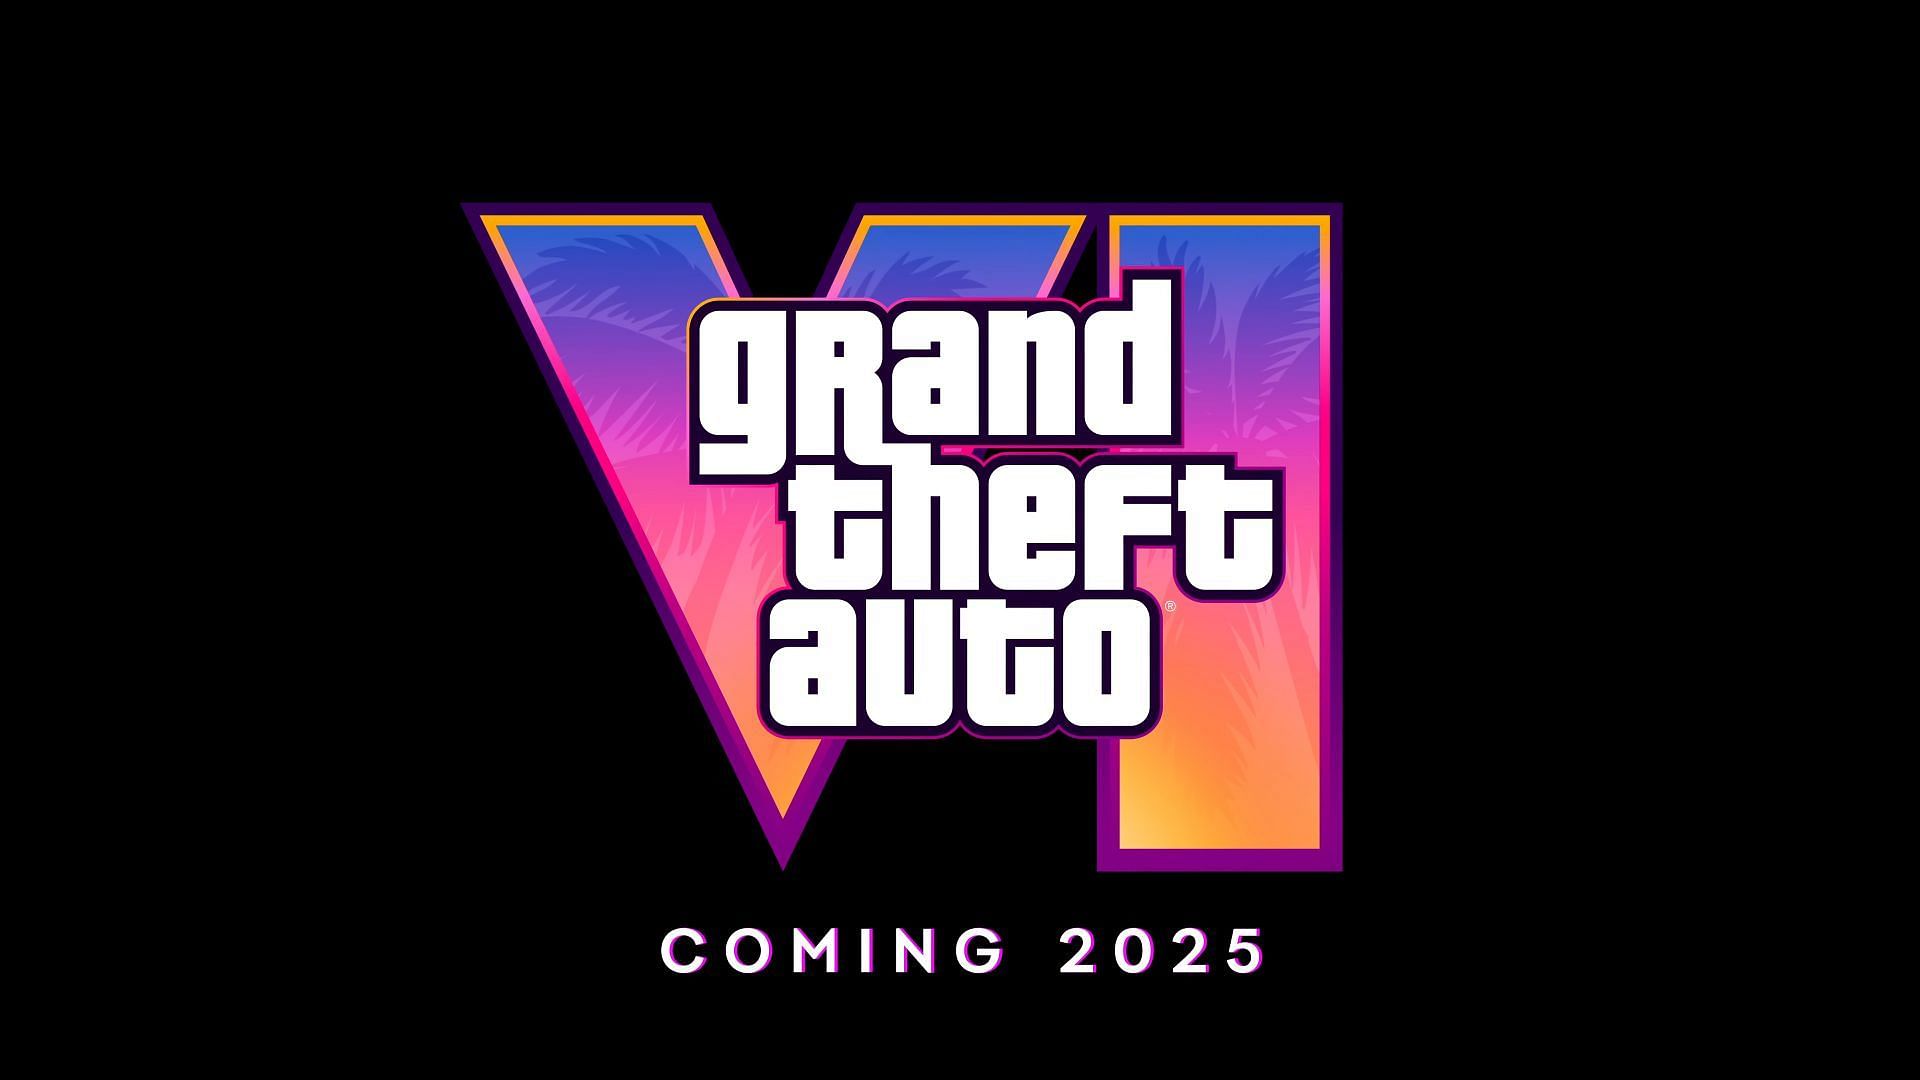 Rockstar Games&rsquo; official statement about the Grand Theft Auto 6 release date (Image via Rockstar Games)